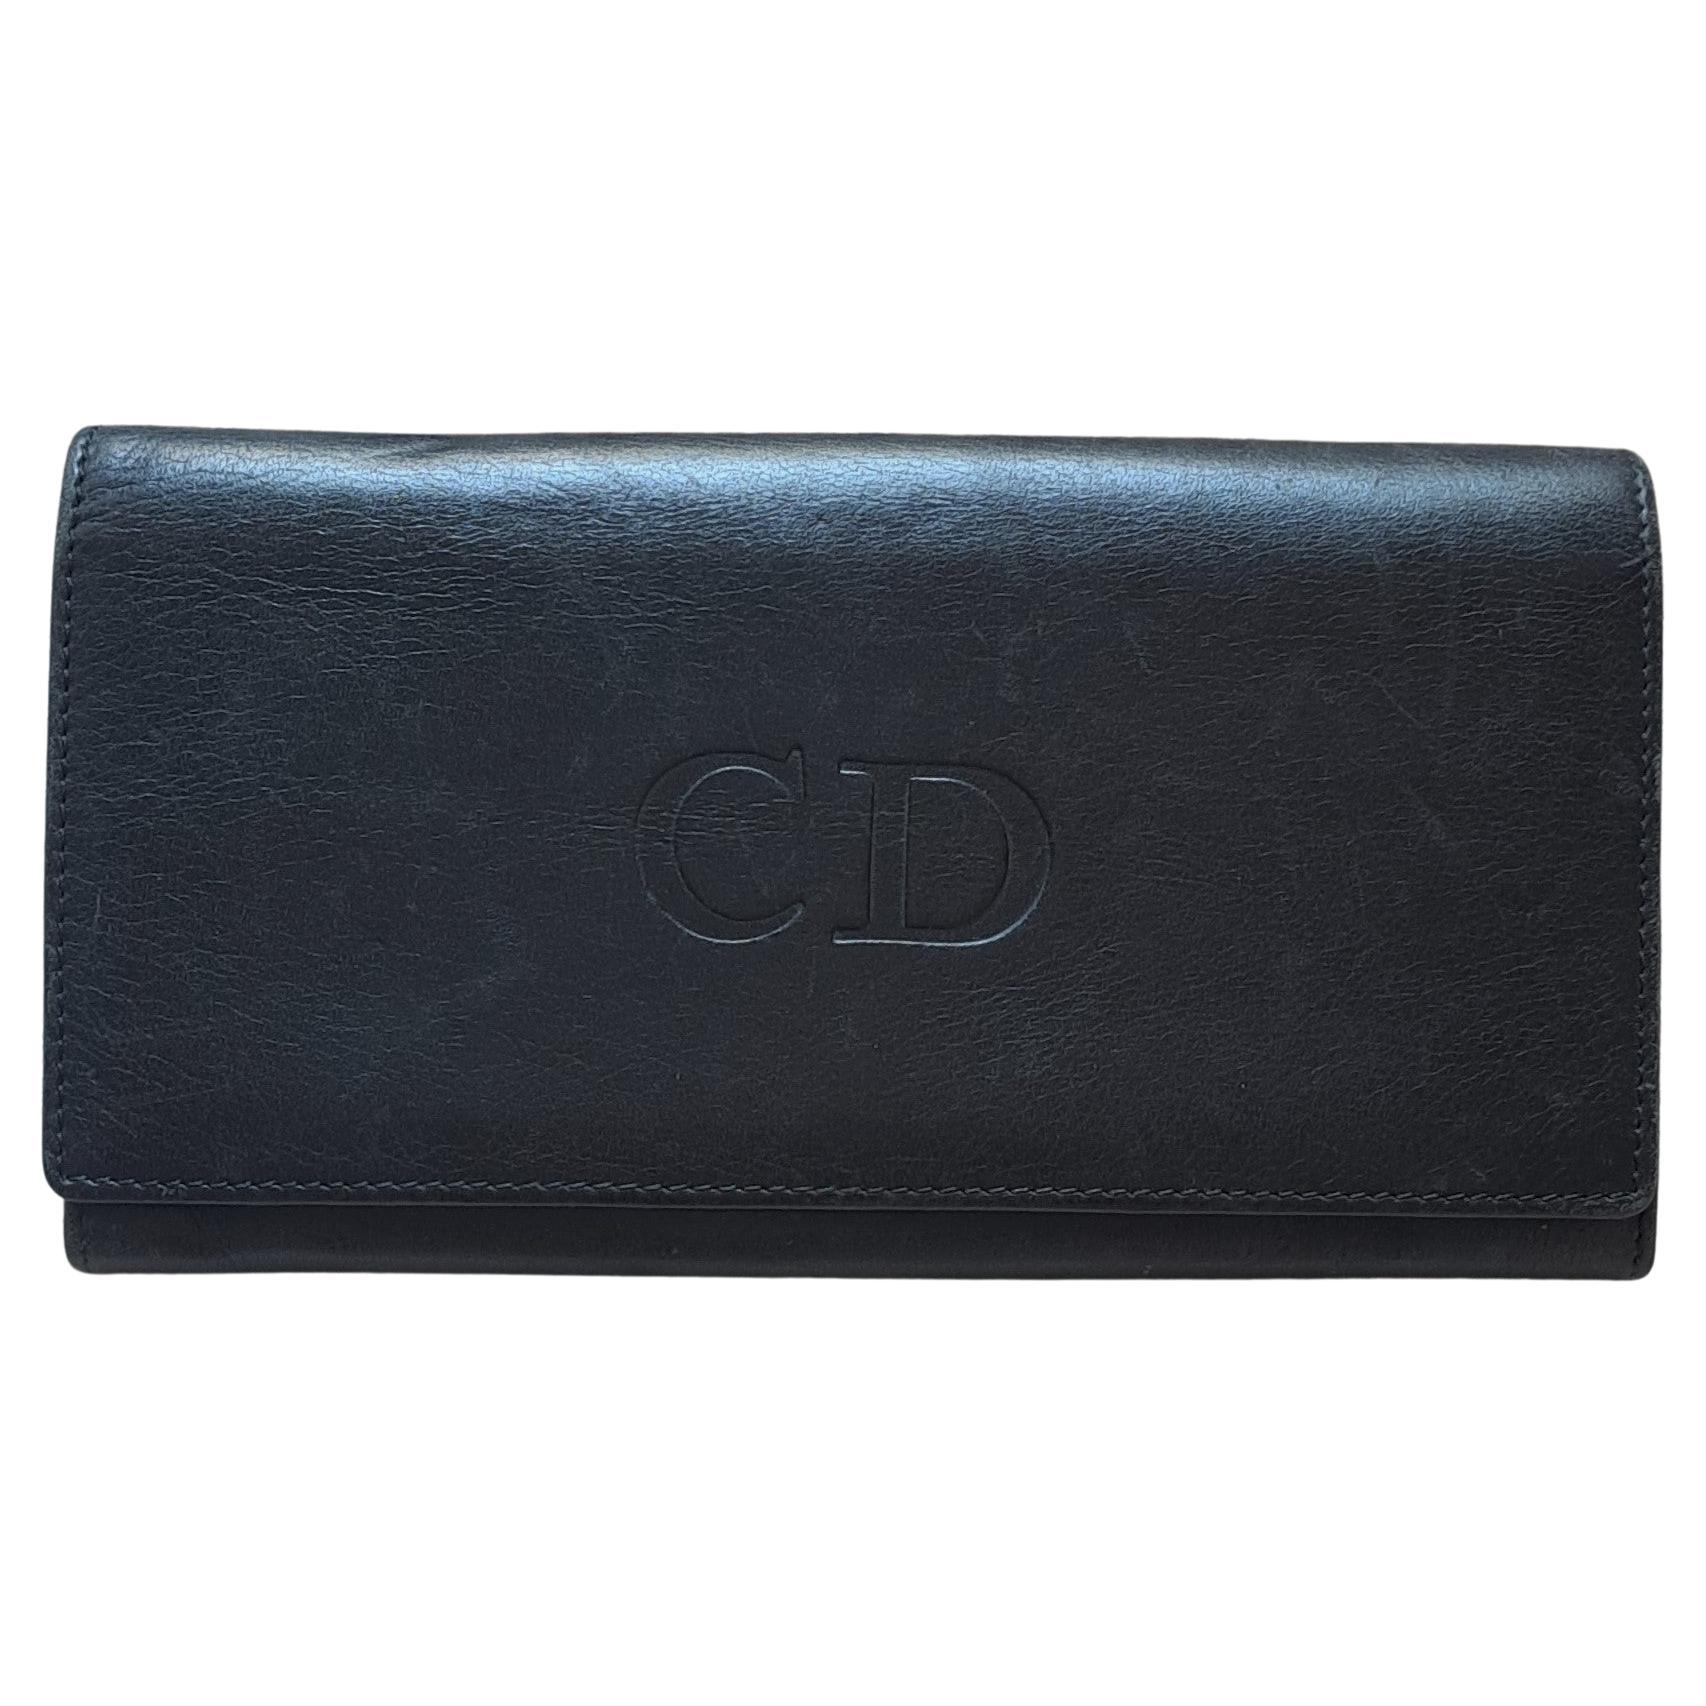 1990s Christian Dior Black Leather Wallet with Logo Charm